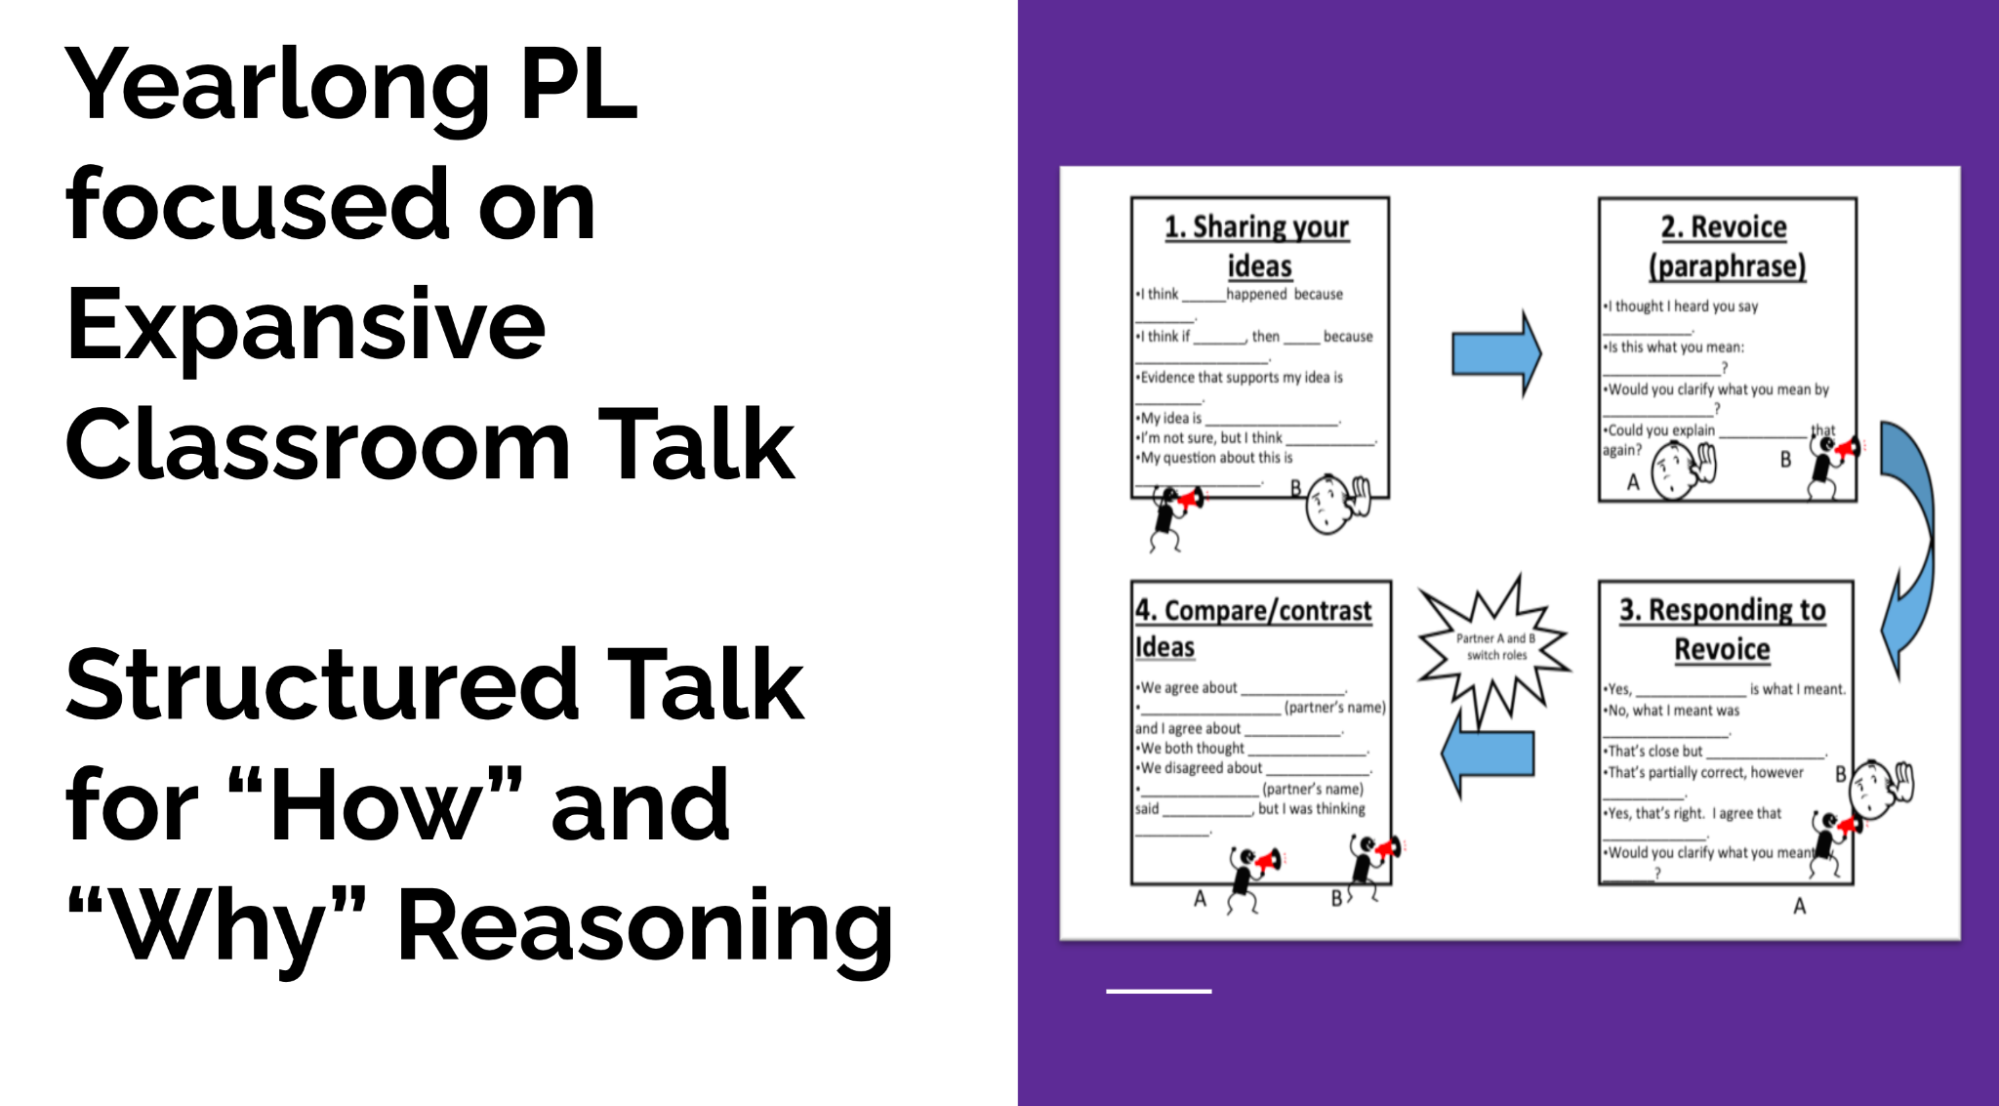 Yearlong PL focused on expansive classroom talk. Structured talk for "how" and "why" reasoning. Starts with sharing ideas, then revoicing (paraphrasing), then responding to revoice, and finally compare/contrast ideas.